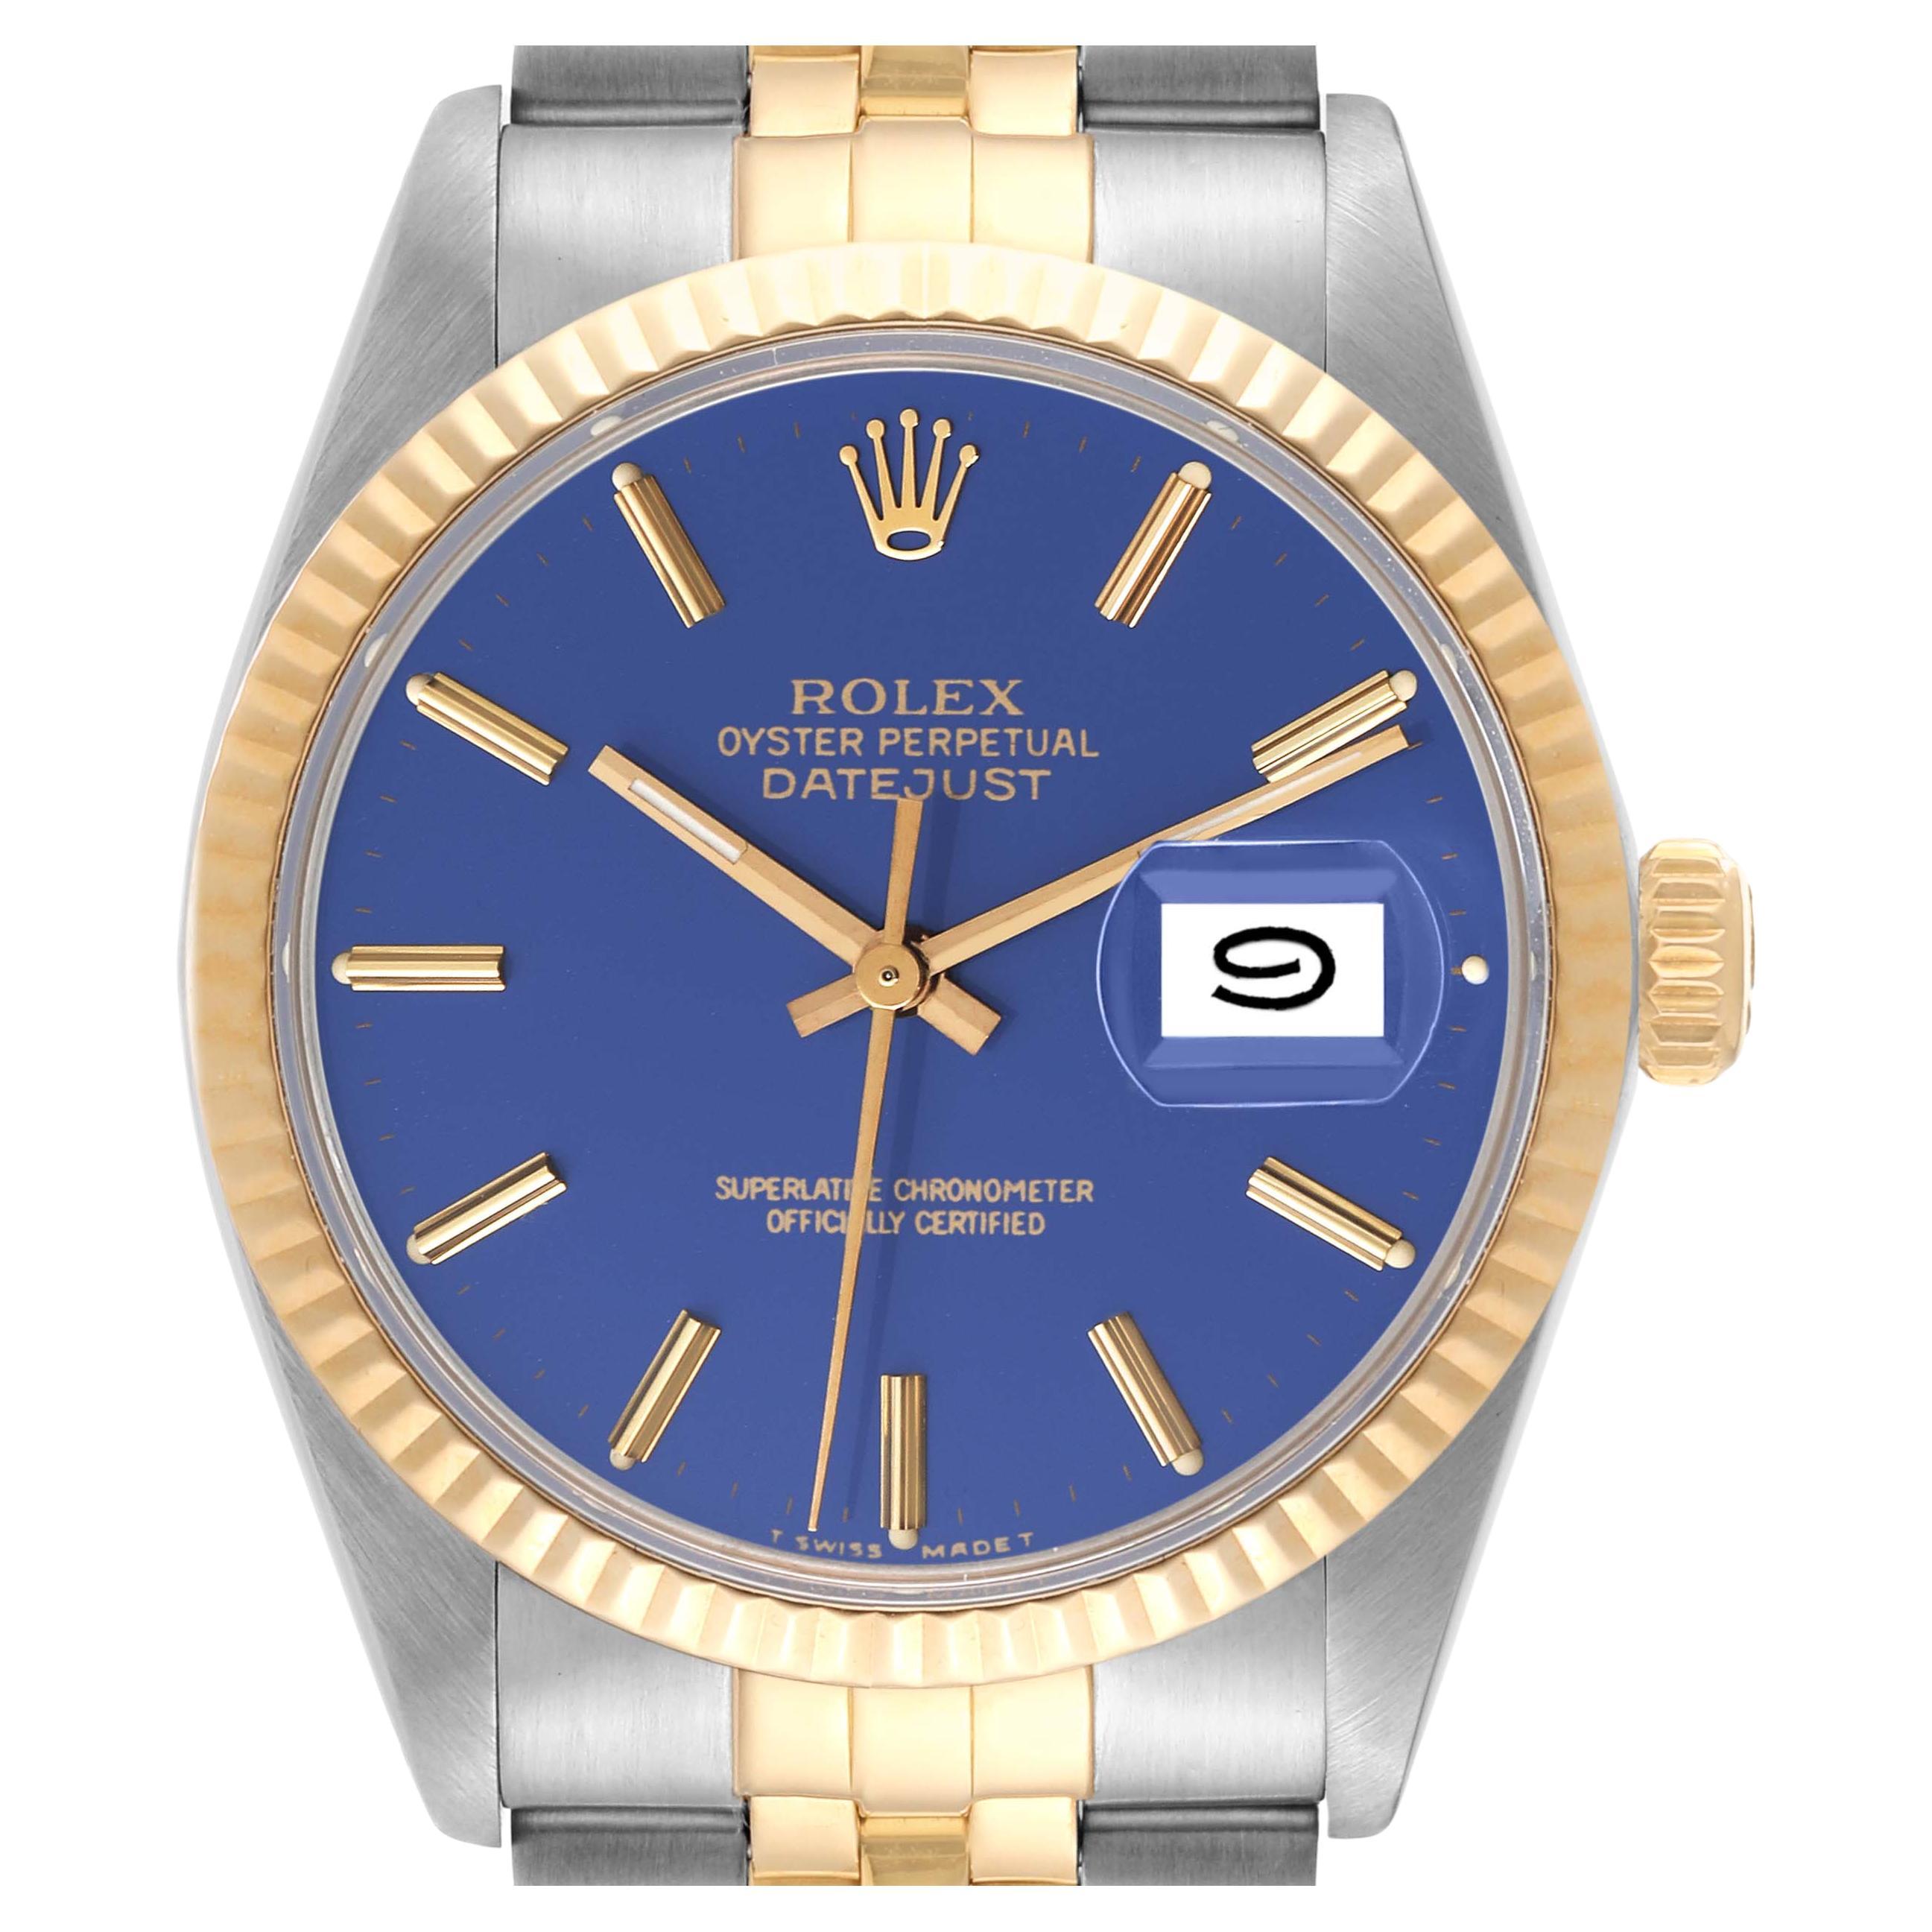 Rolex Datejust Steel Yellow Gold Blue Dial Vintage Mens Watch 16013 Box Papers